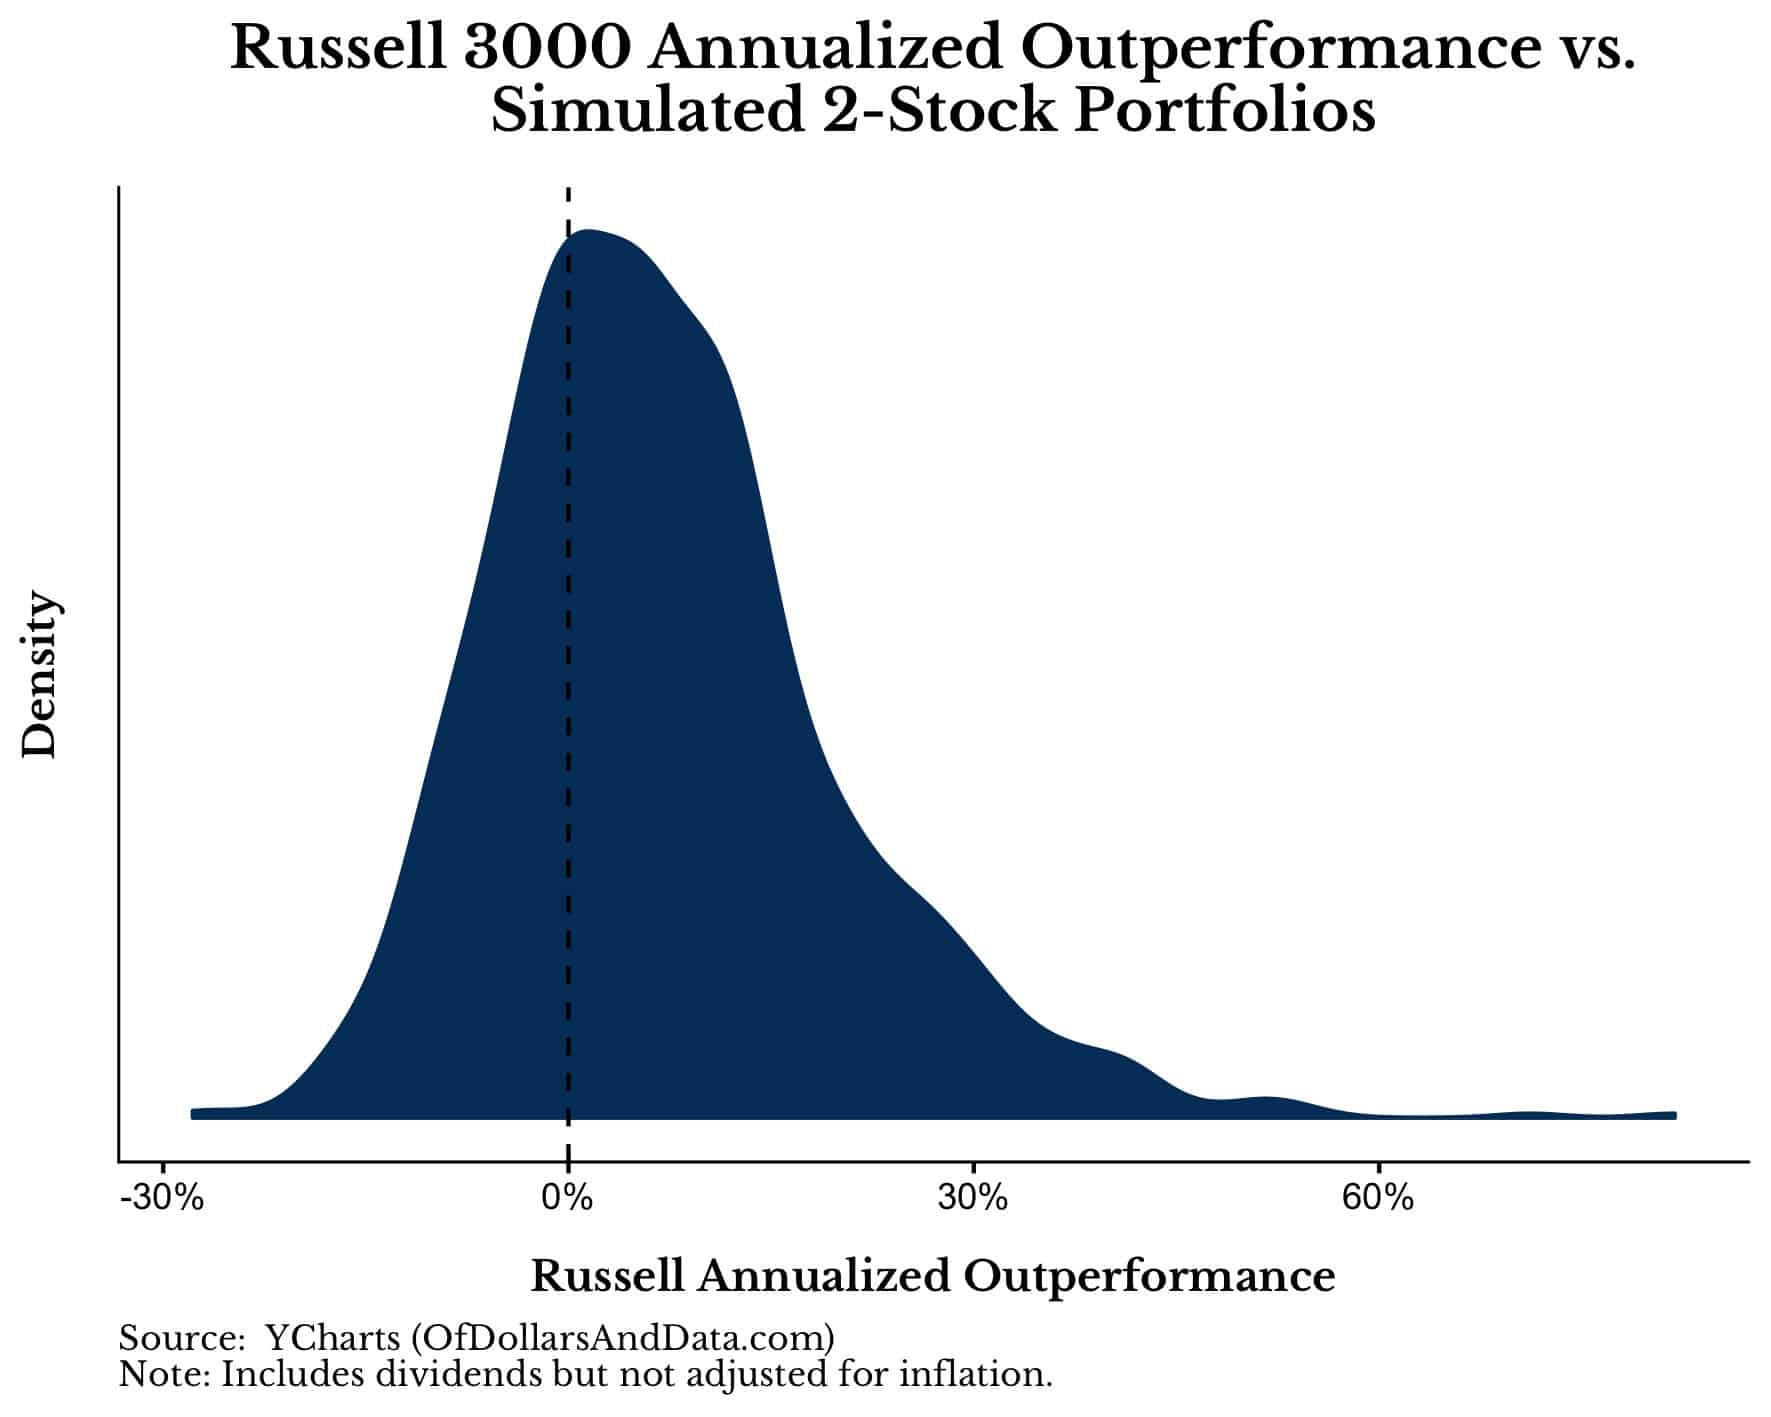 Distribution of Russell 3000 annualized outperformance vs. simulated 2-stock portfolios